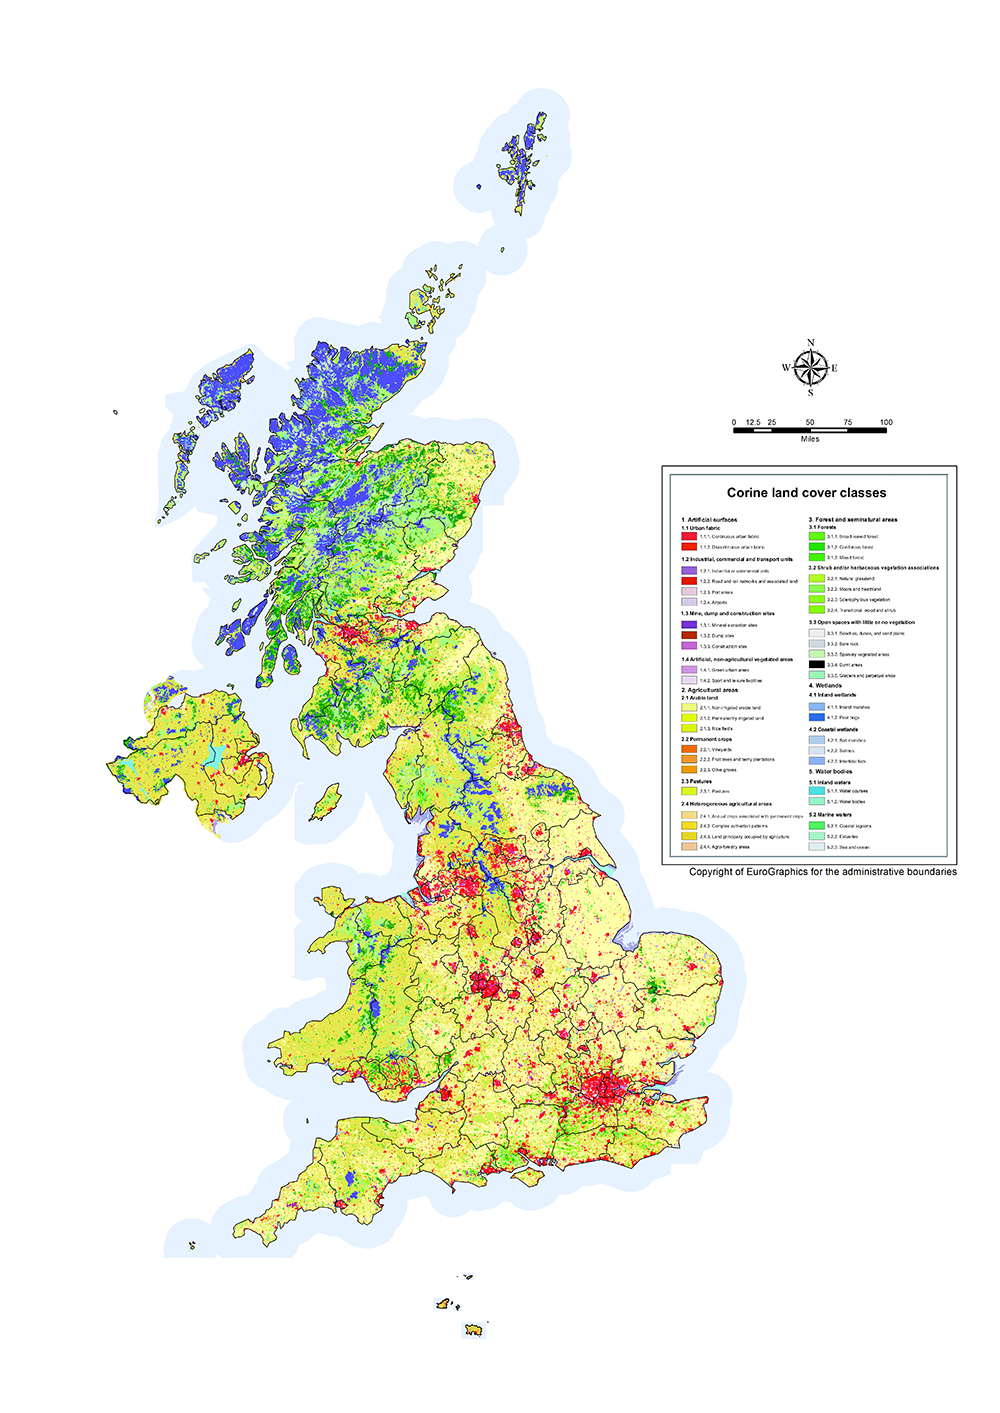 National map of land cover launched by researchers at the University of Leicester together with consultancy company Specto Natura